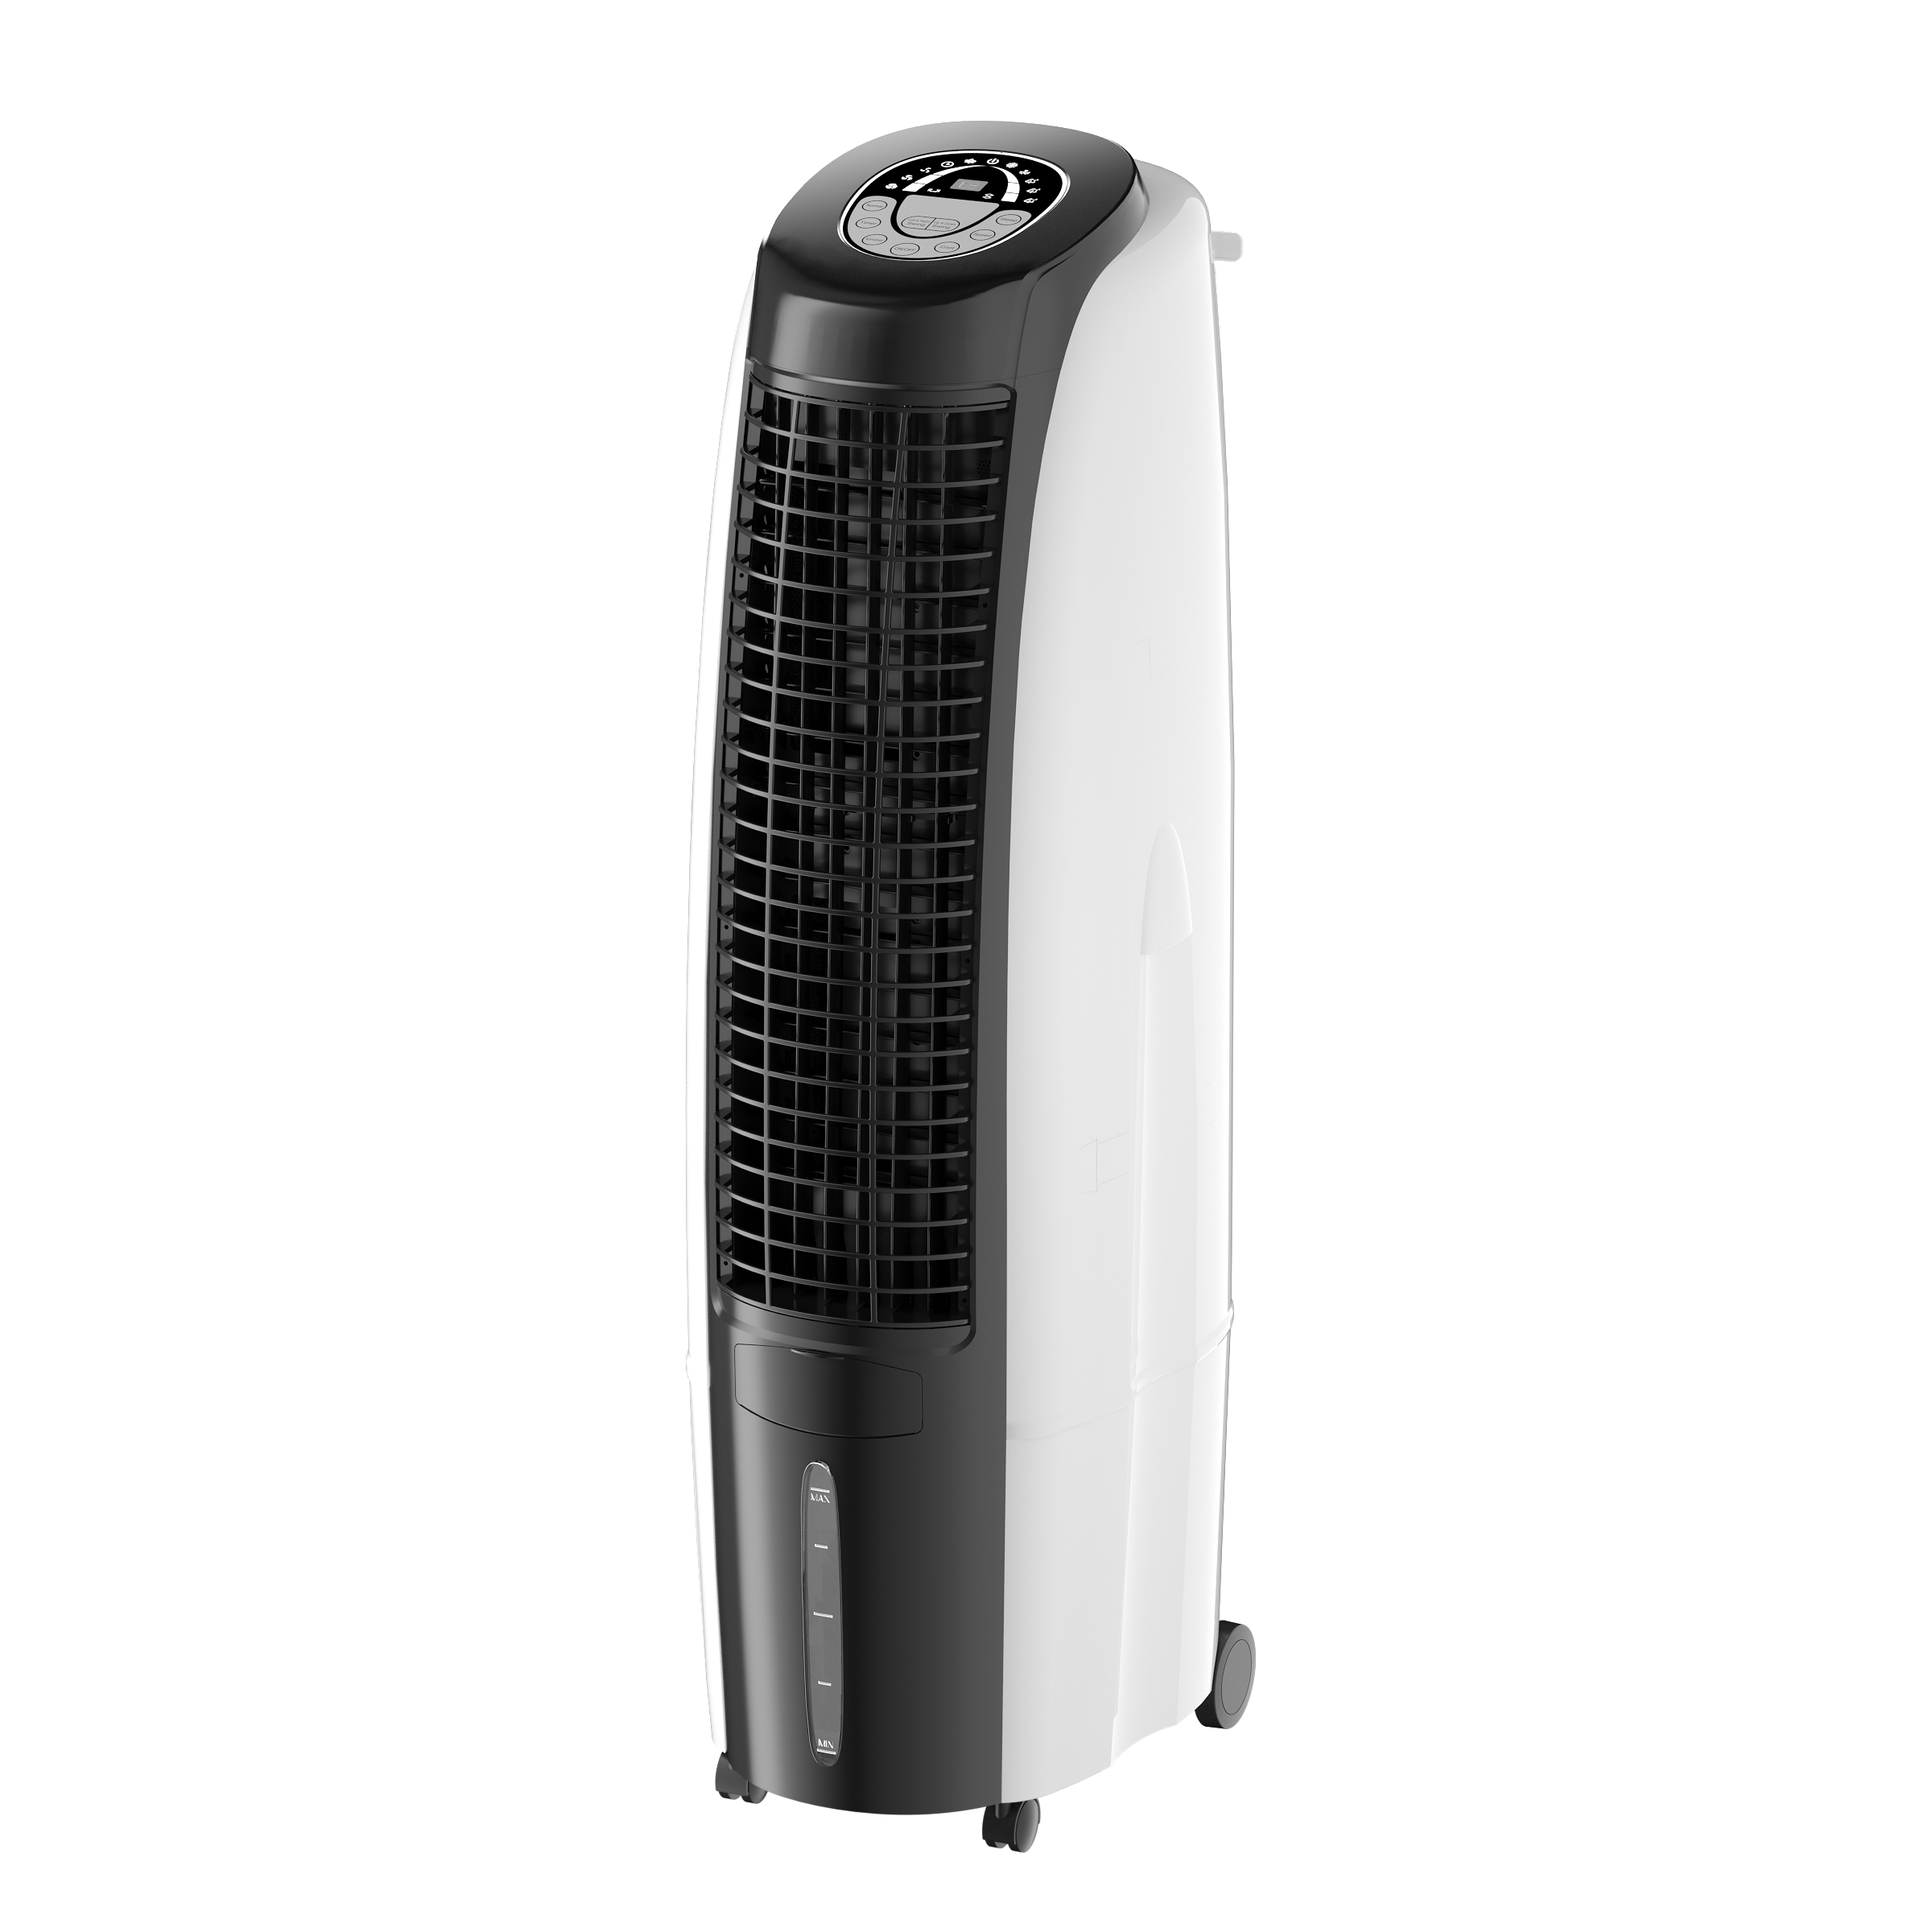 30L Household Small Home Evaporative Air Cooler Cooling System